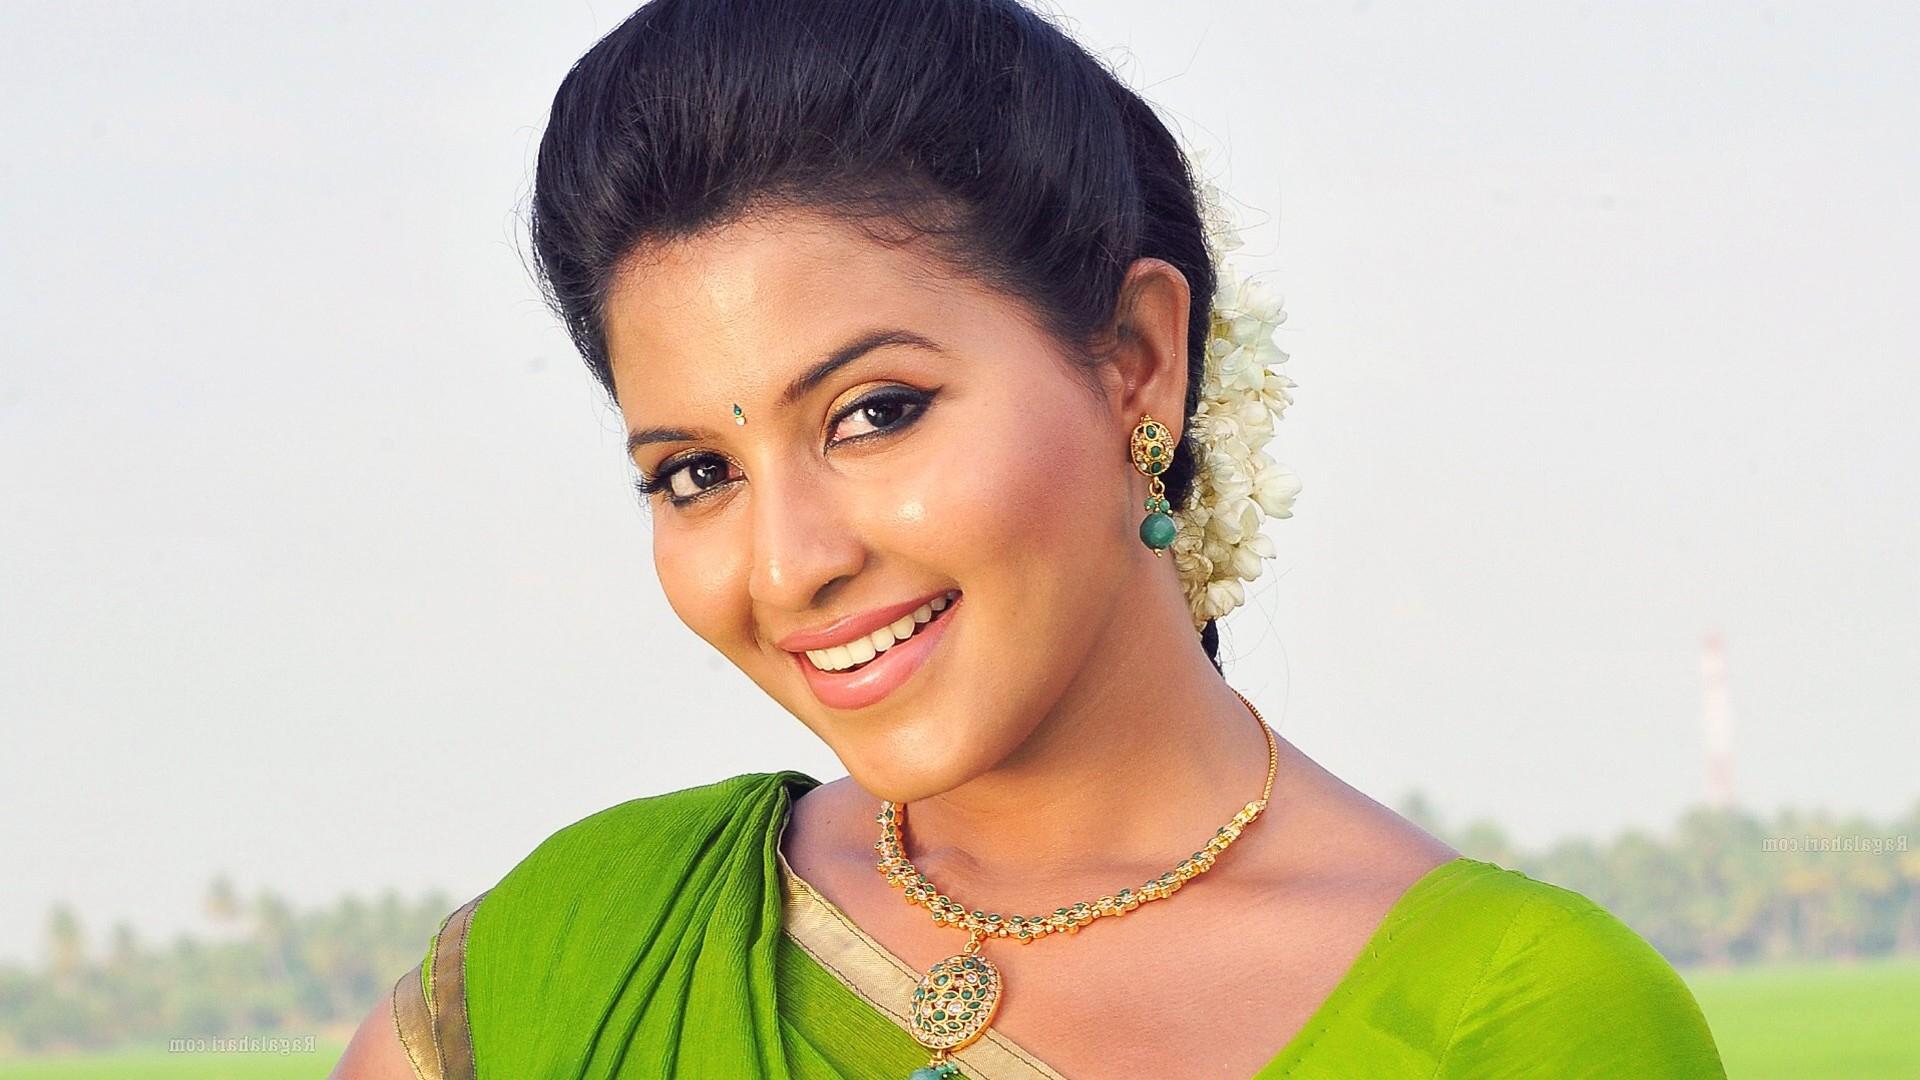 Tamil Actress HD Mobile 1920x1080 Wallpapers - Wallpaper Cave